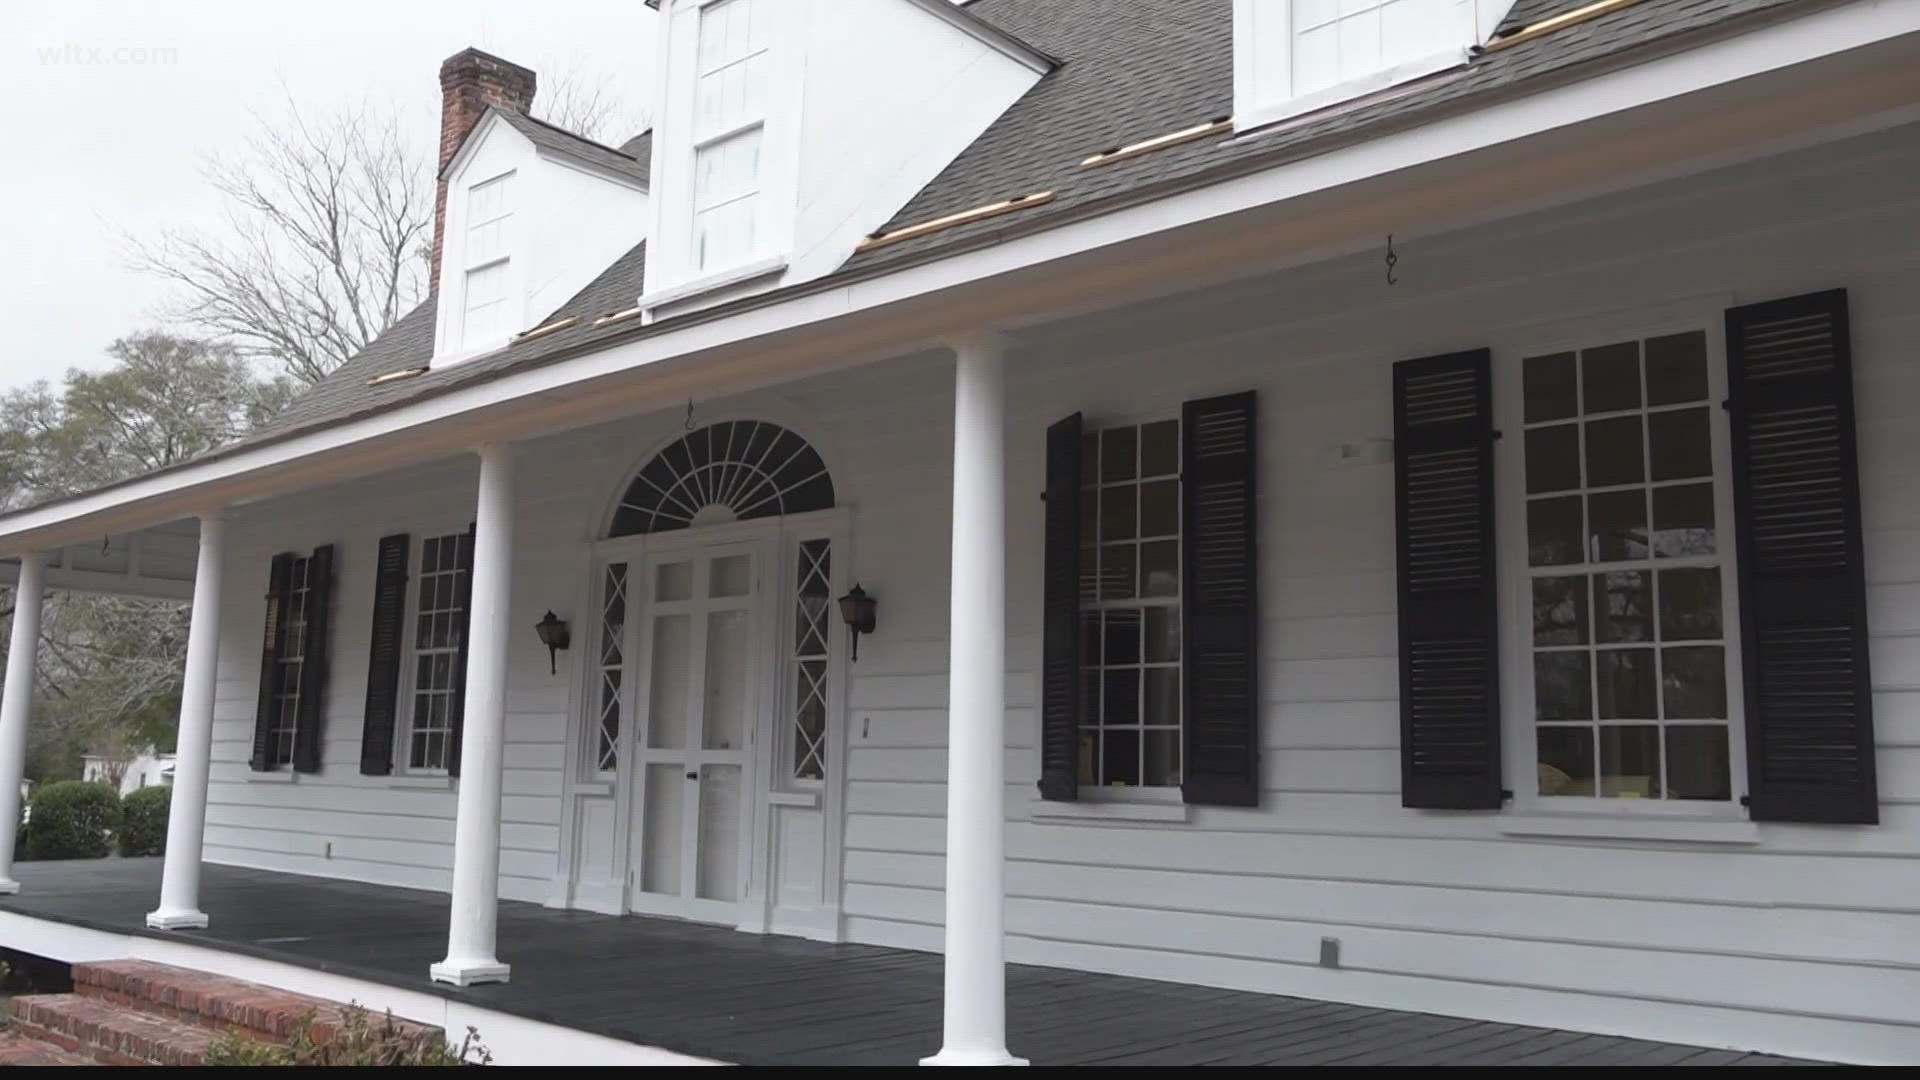 The Kershaw County Arts Center was granted a $10,000 donation to help with the restoration of a historic building in the community.